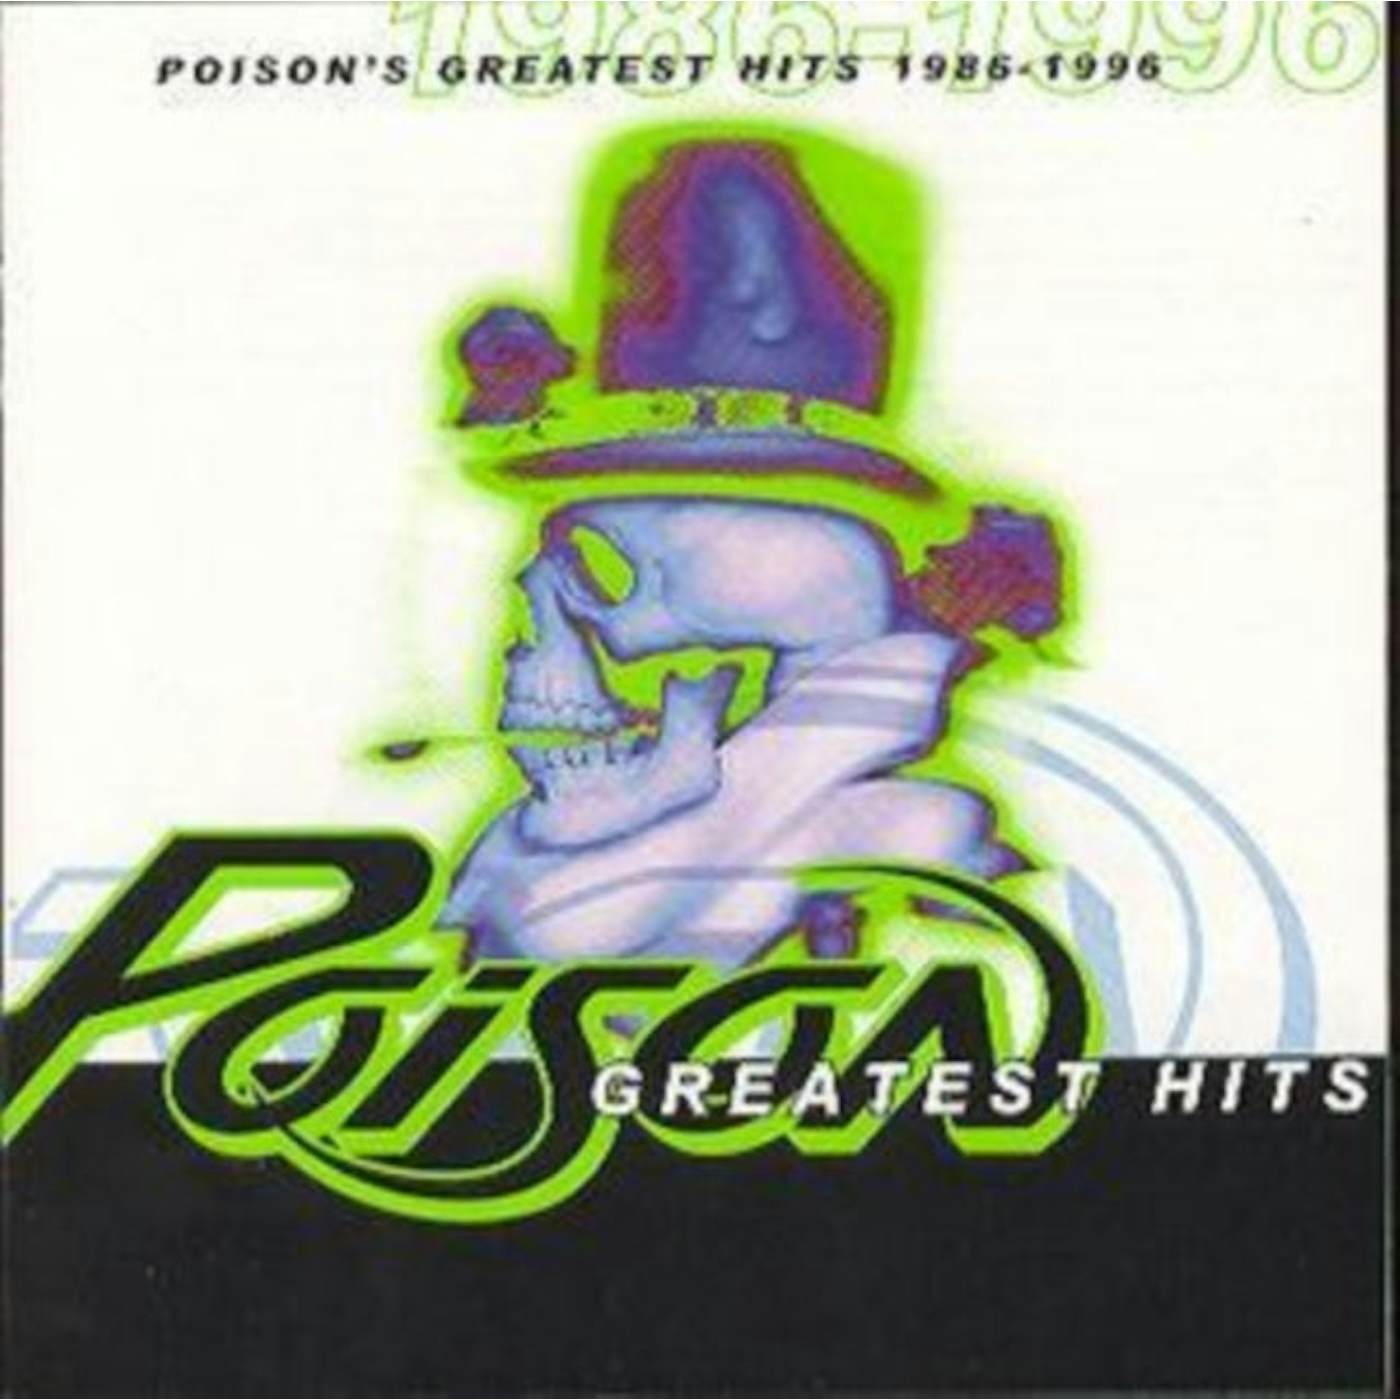 Poison CD - Greatest Hits - 1986-1996